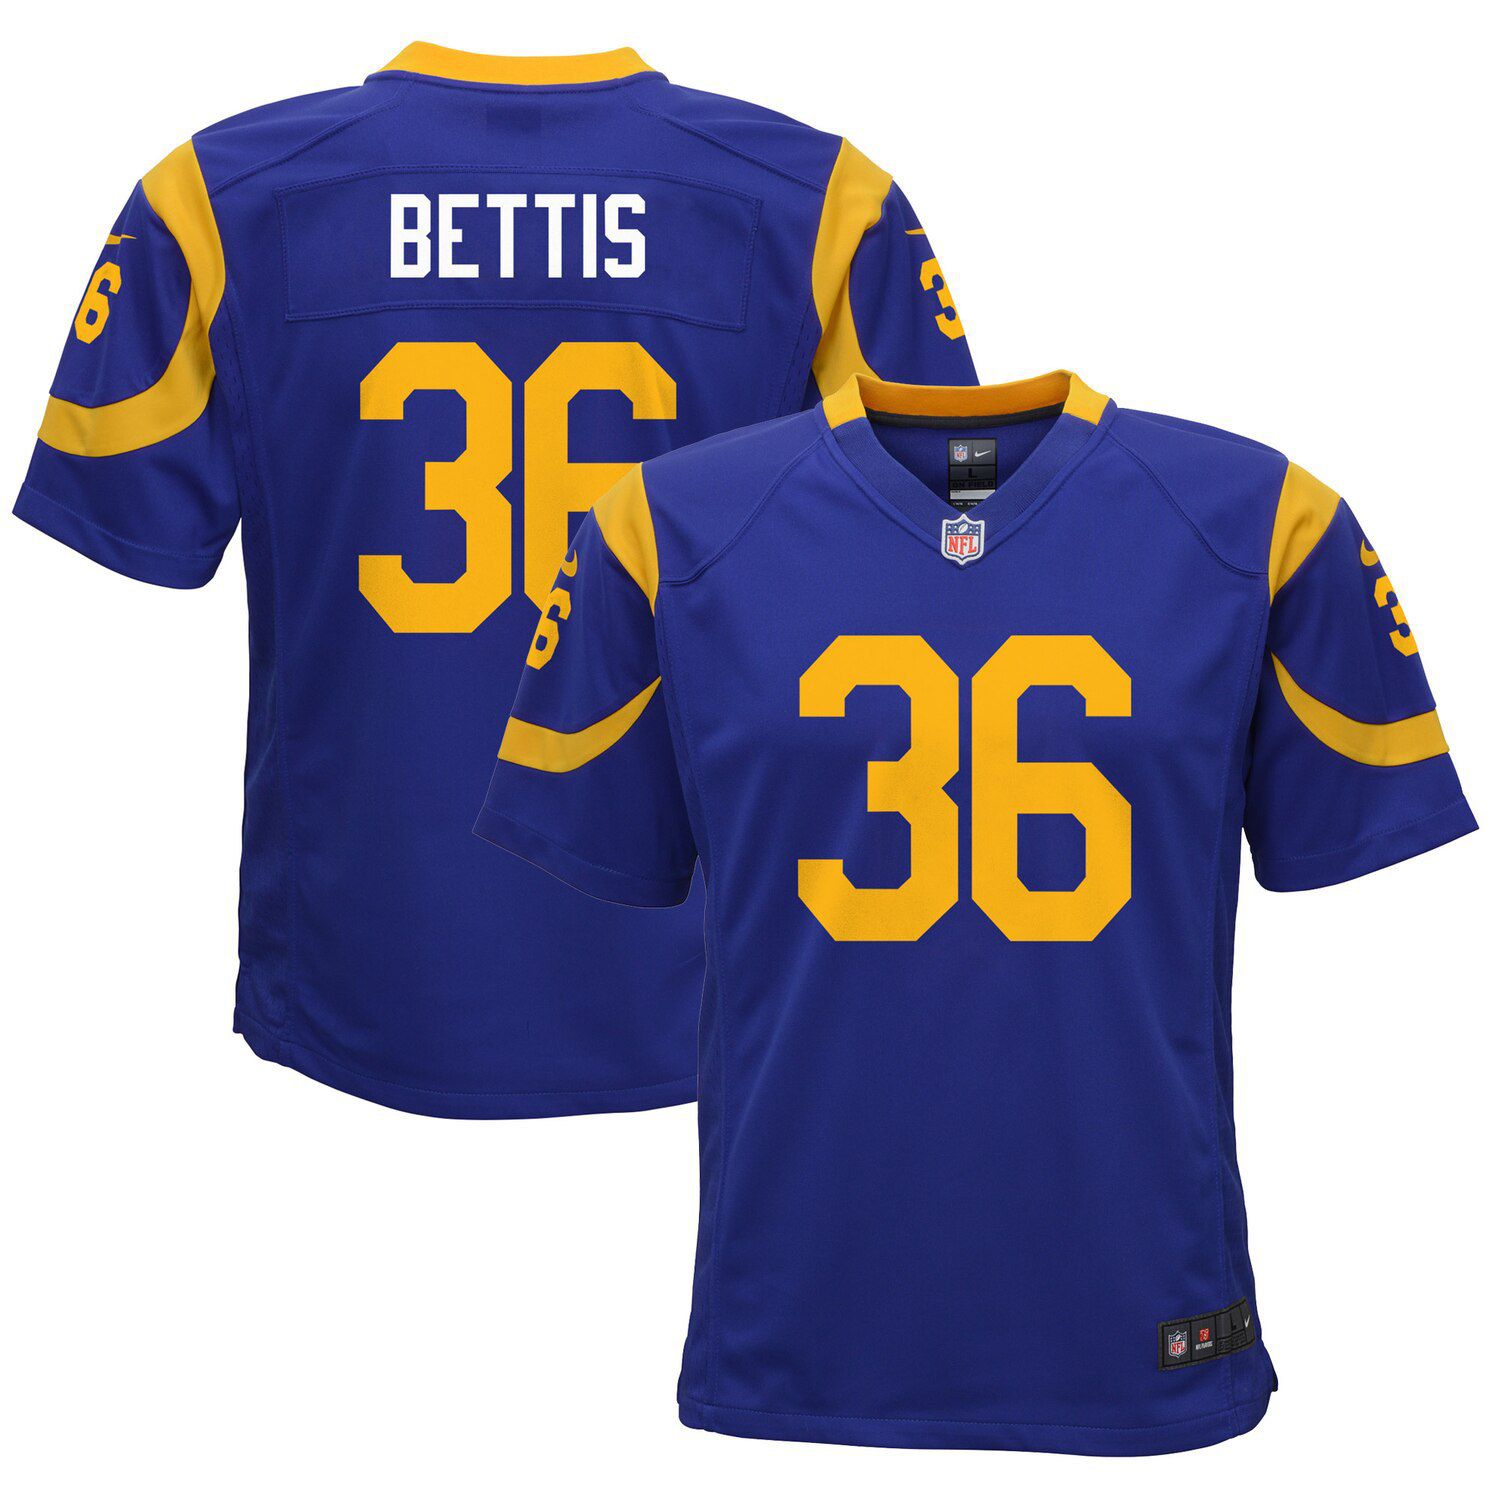 jerome bettis jersey for sale